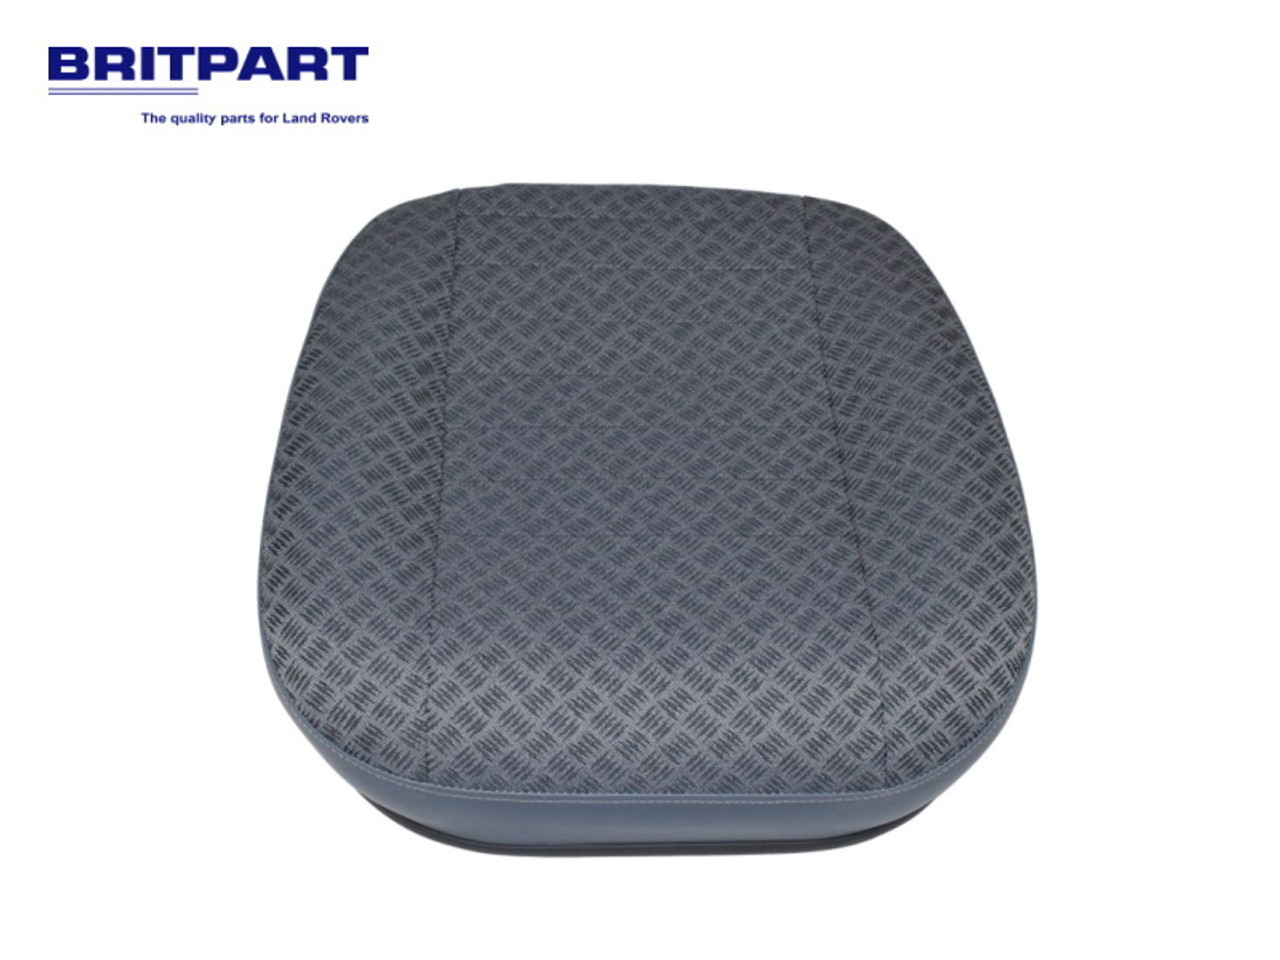 Britpart Techno Style Outer Seat Base For Defender - HAG100970LOY